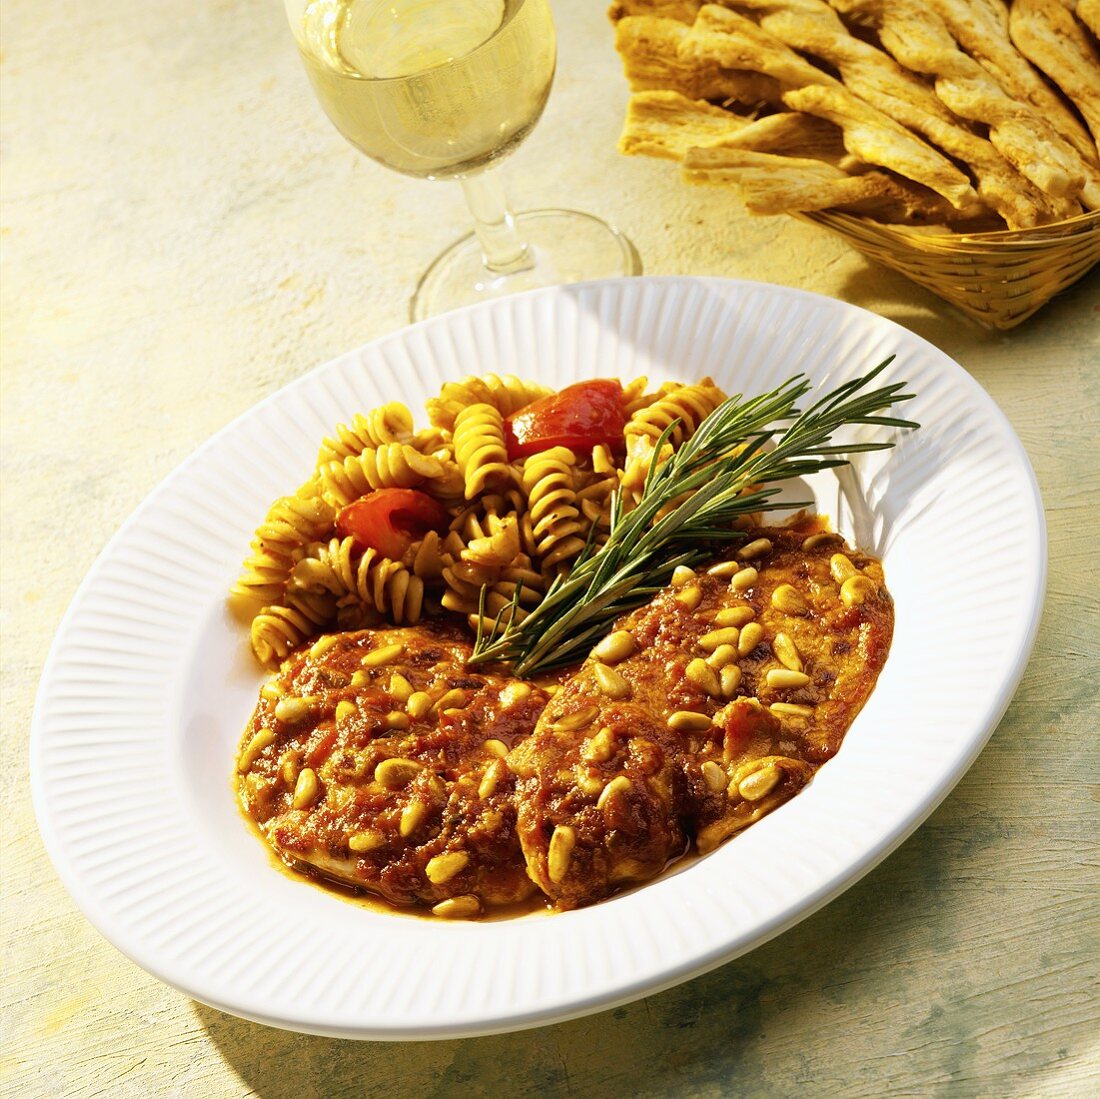 Tilapia in a Tomato Sauce with Pine Nuts and Pasta